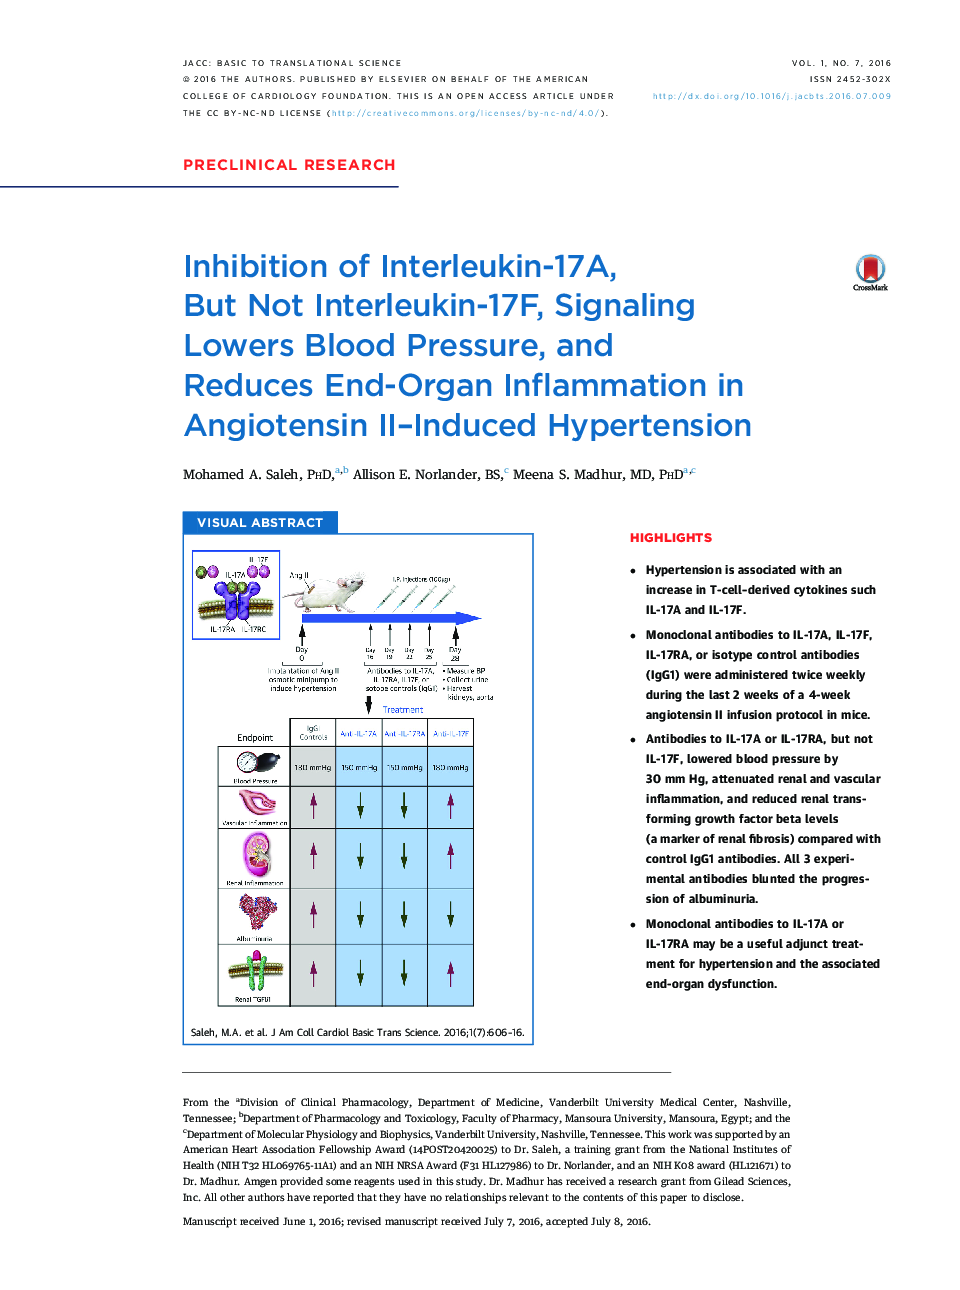 Inhibition of Interleukin-17A, But Not Interleukin-17F, Signaling LowersÂ Blood Pressure, and Reduces End-Organ Inflammation in Angiotensin II-Induced Hypertension